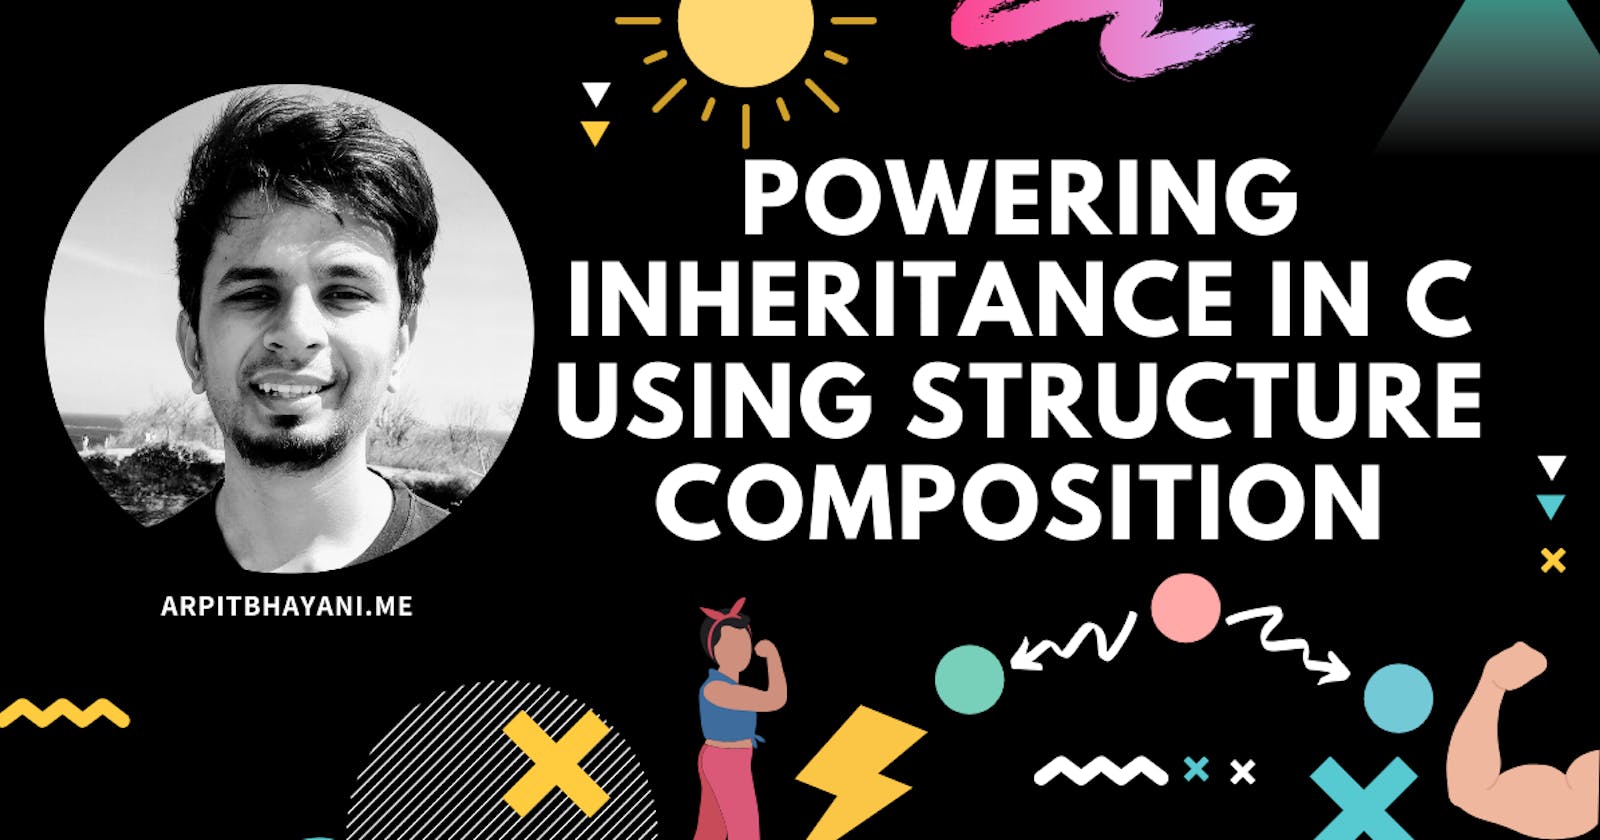 Powering inheritance in C using structure composition